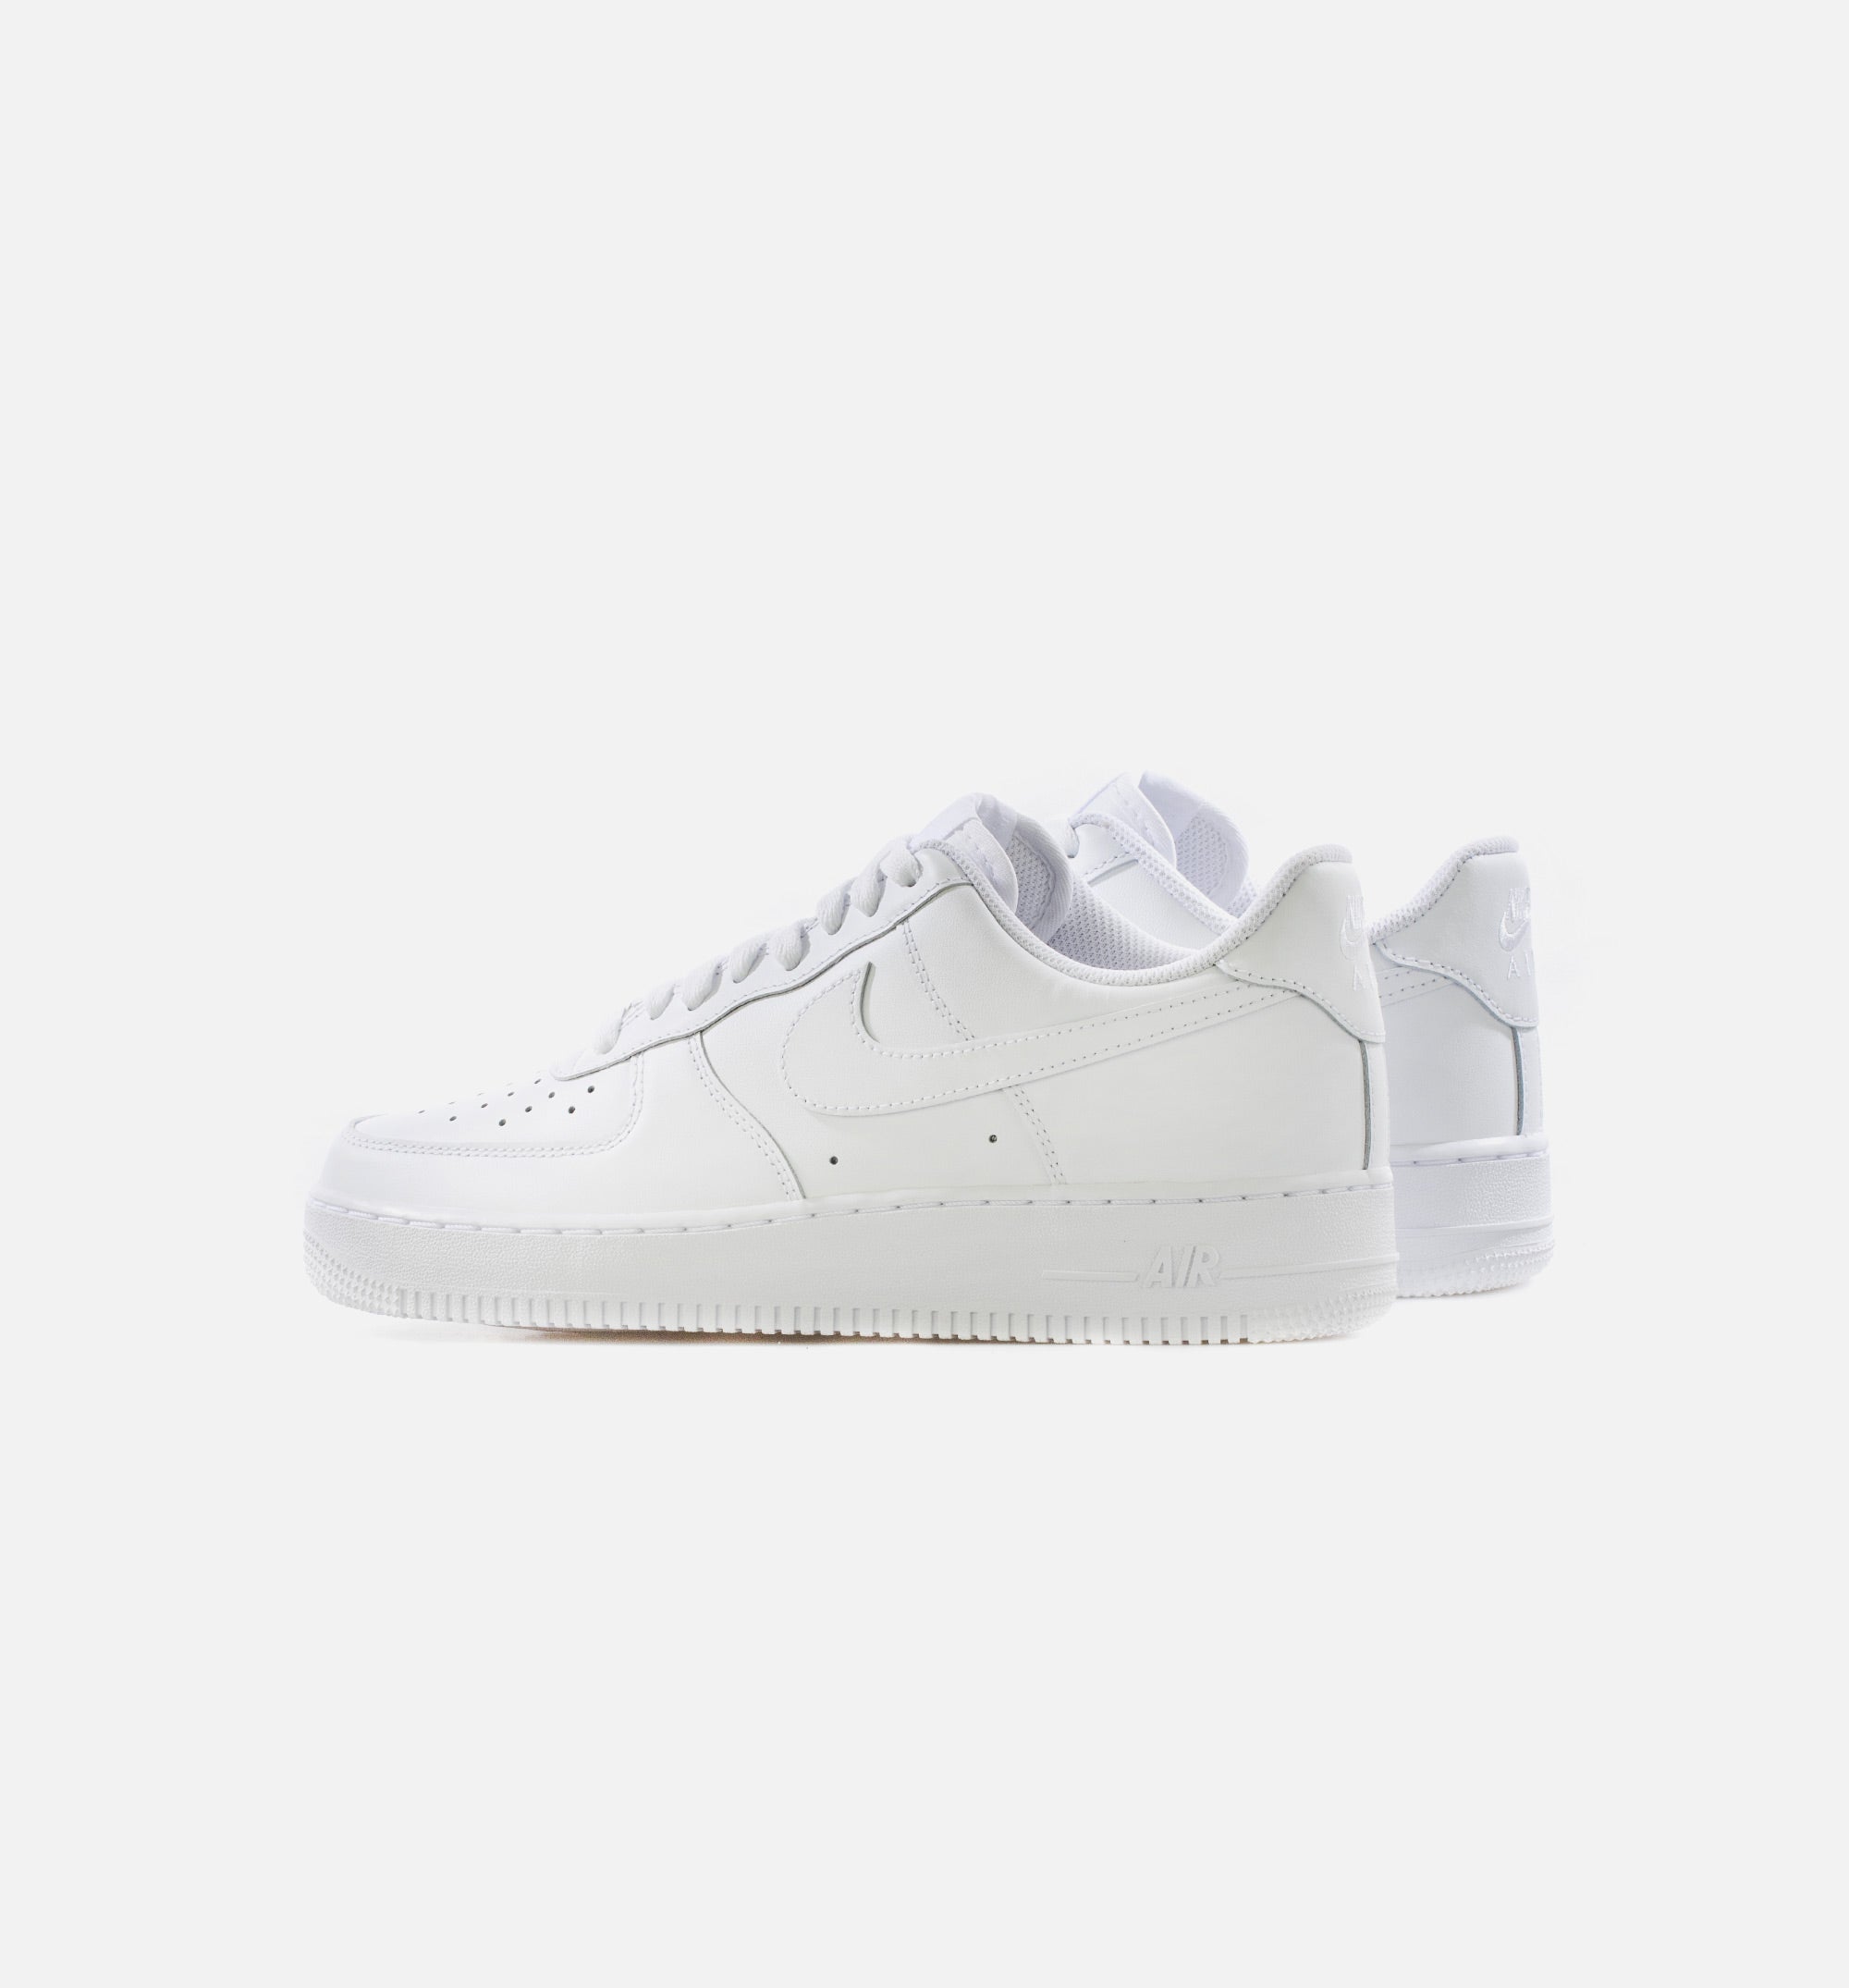 Nike Air Force 1 07 Mens Style : Cw2288-111 